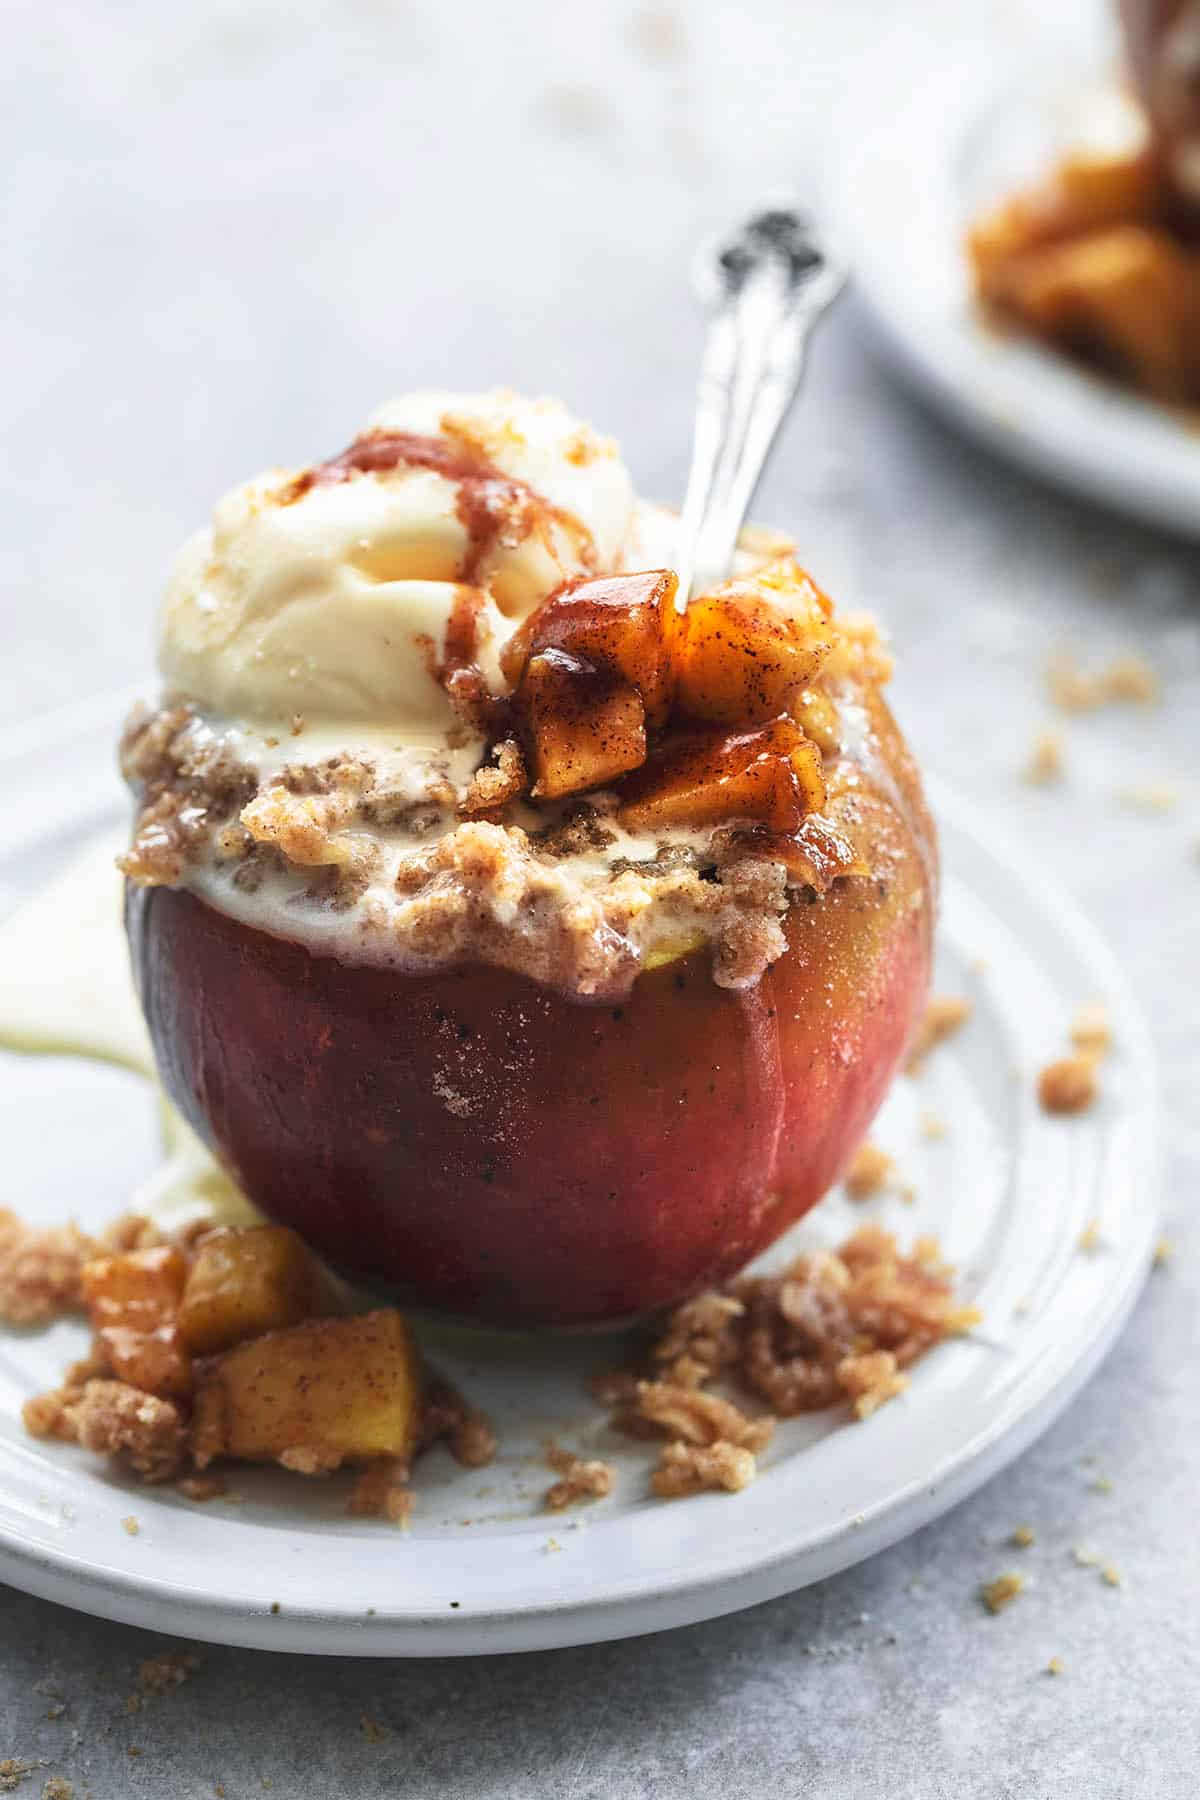 baked apple on plate with spoon in apple